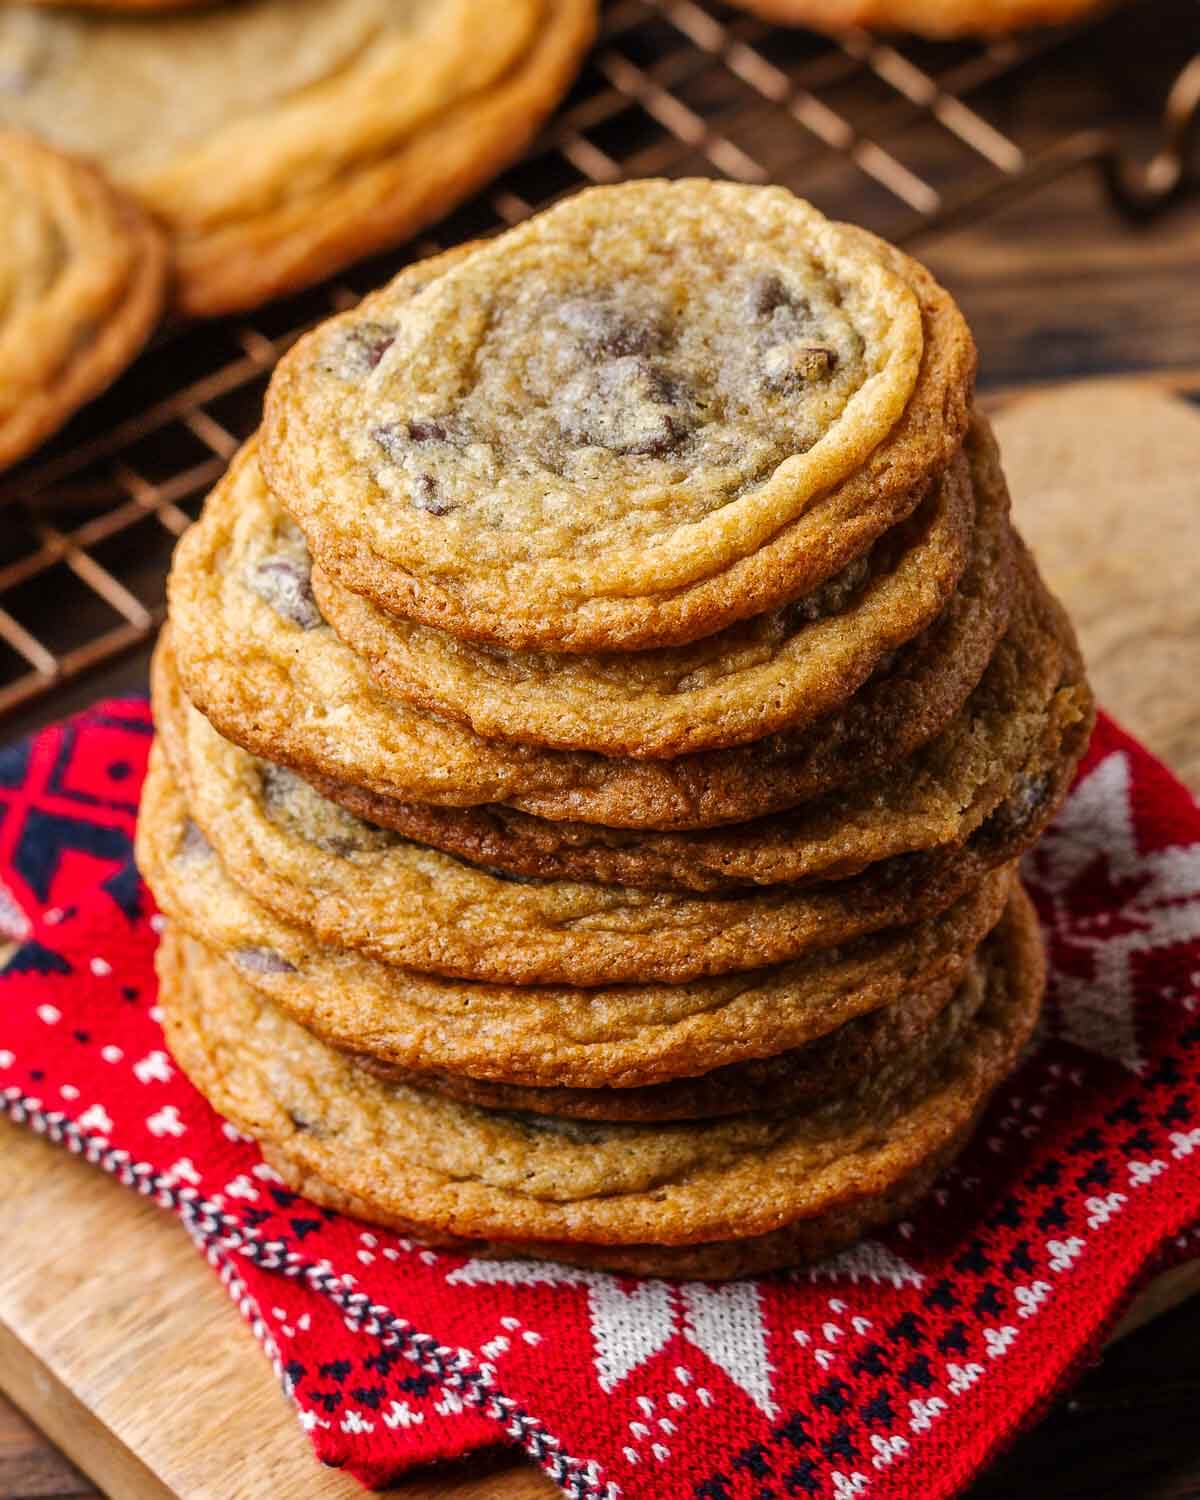 Stack of chocolate chip cookies on red Christmas towel.